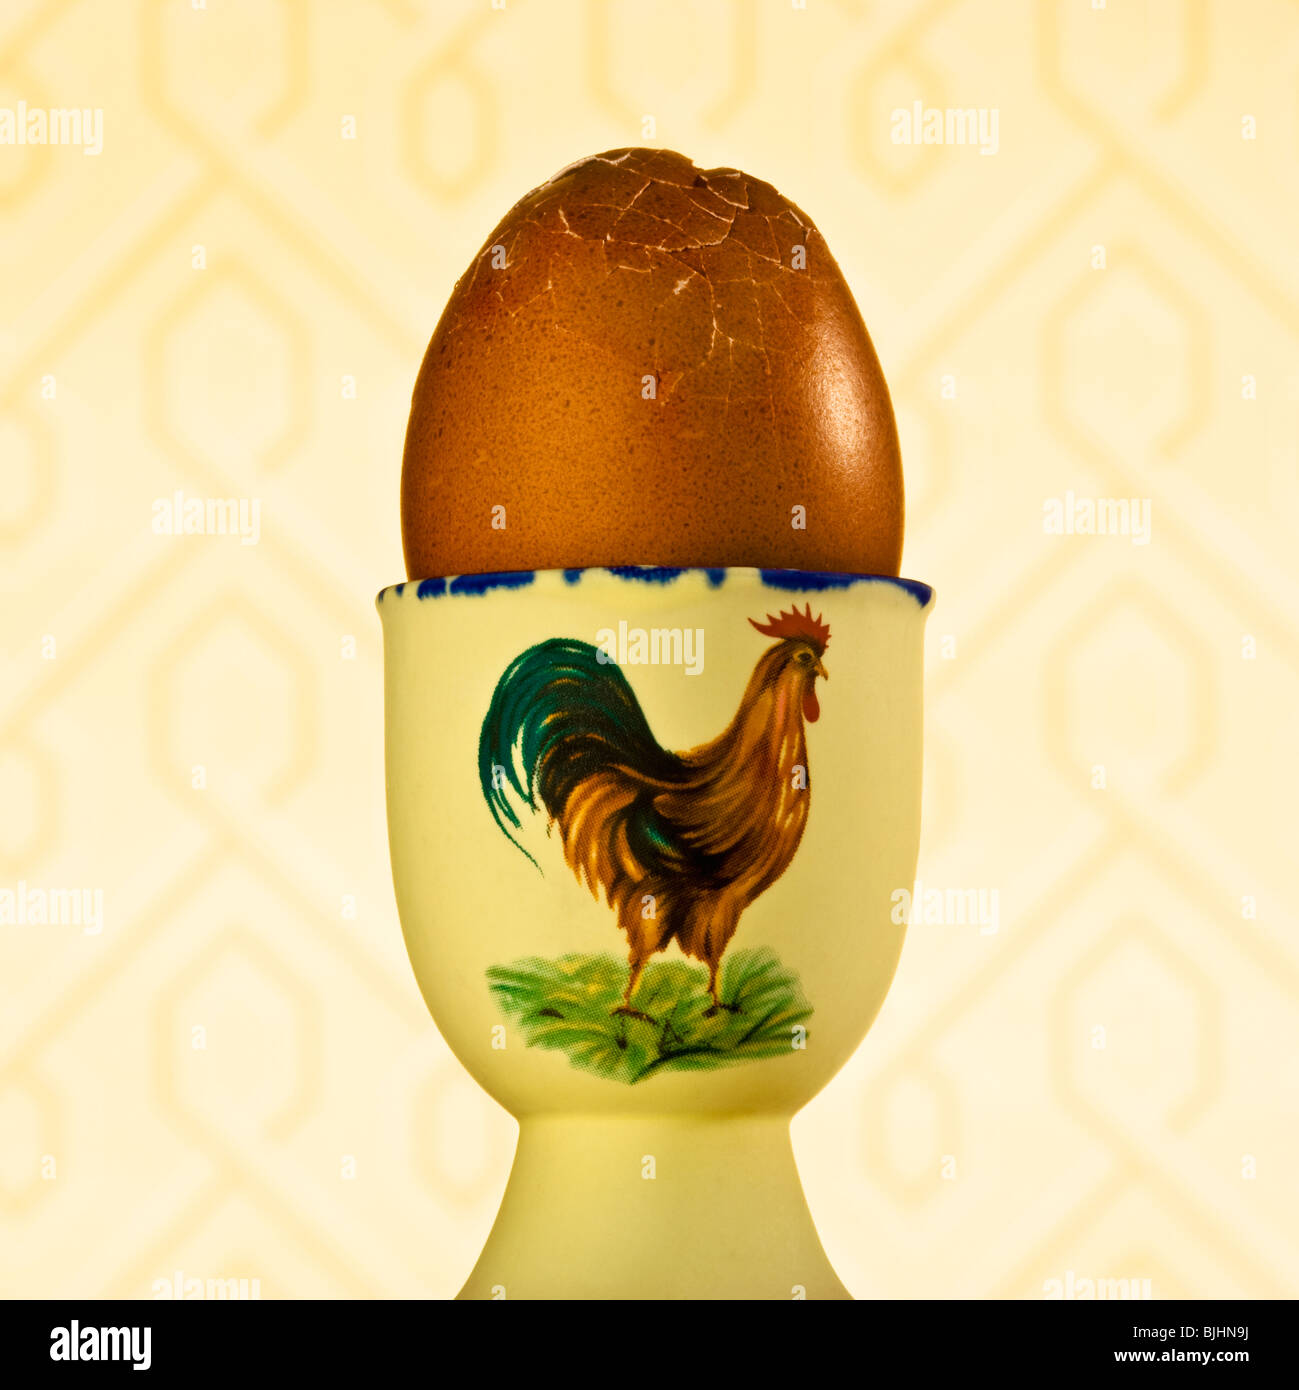 Cracked egg in cup Stock Photo